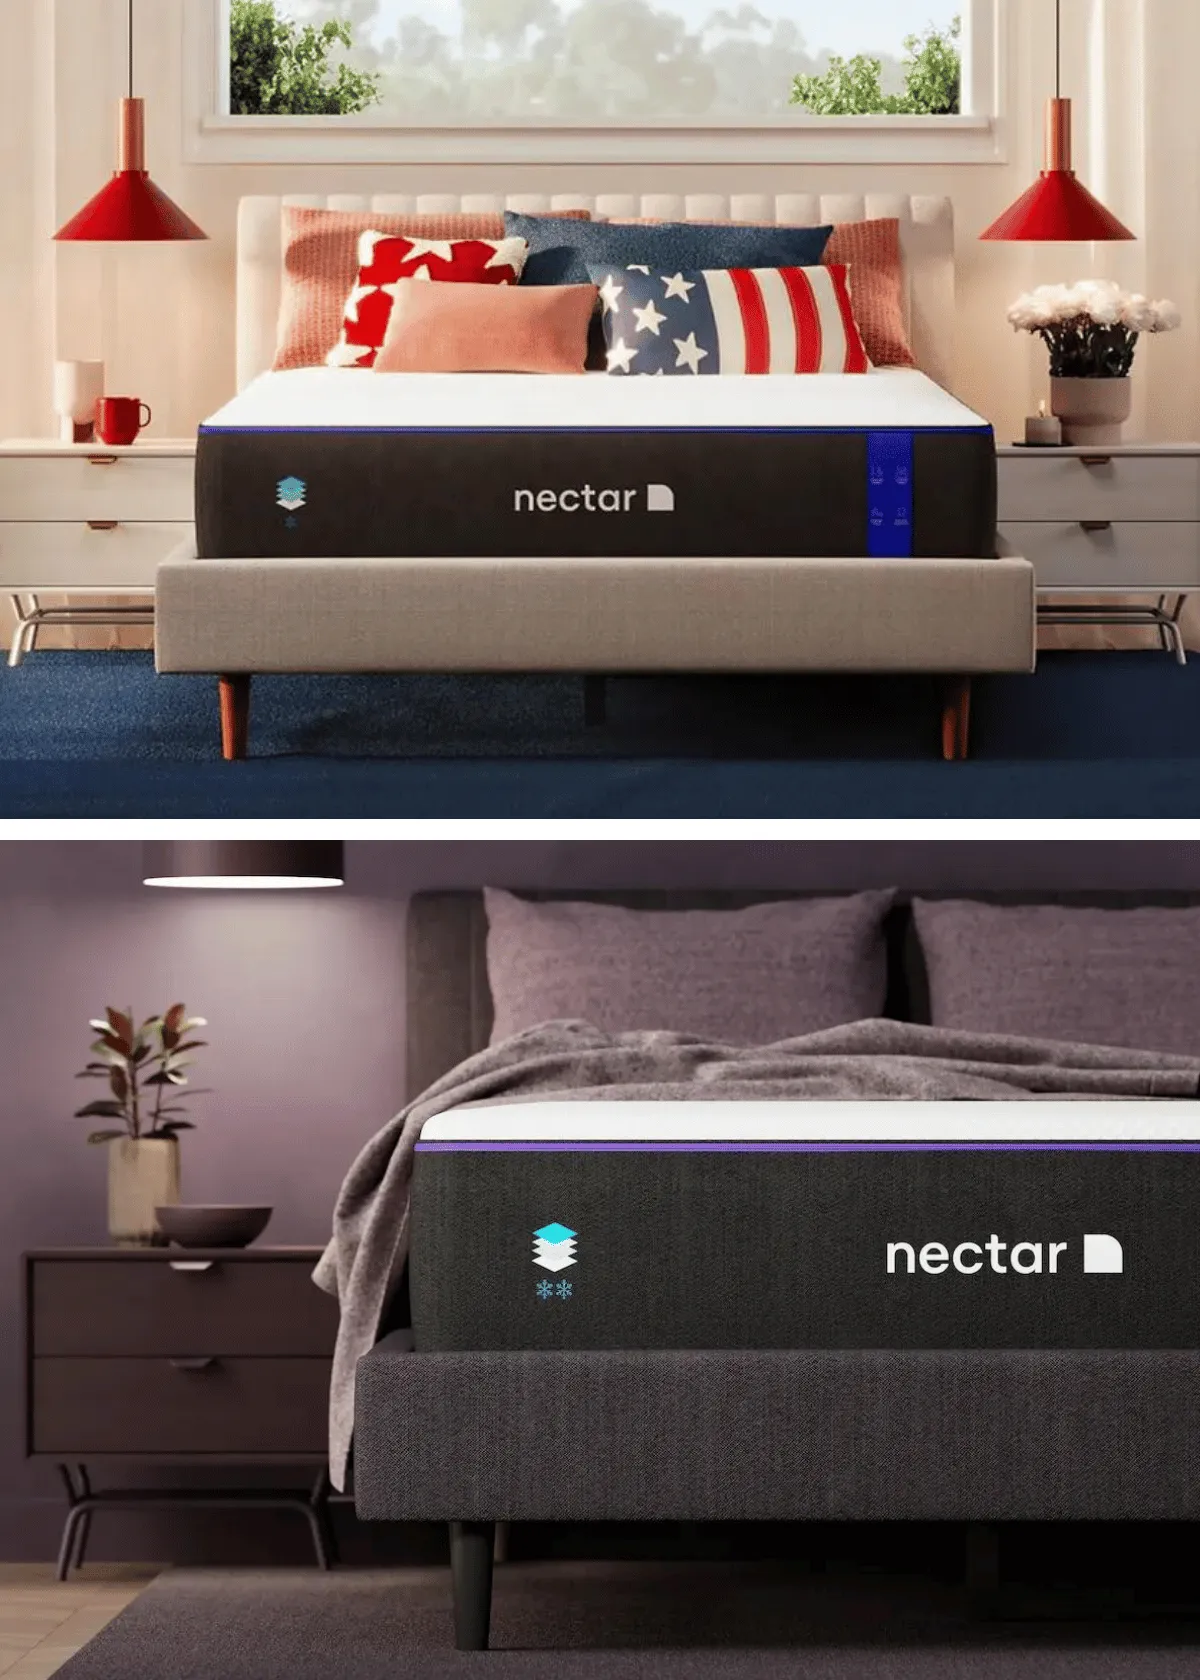 "Is the Nectar King Mattress Worth the Investment? Honest Review"